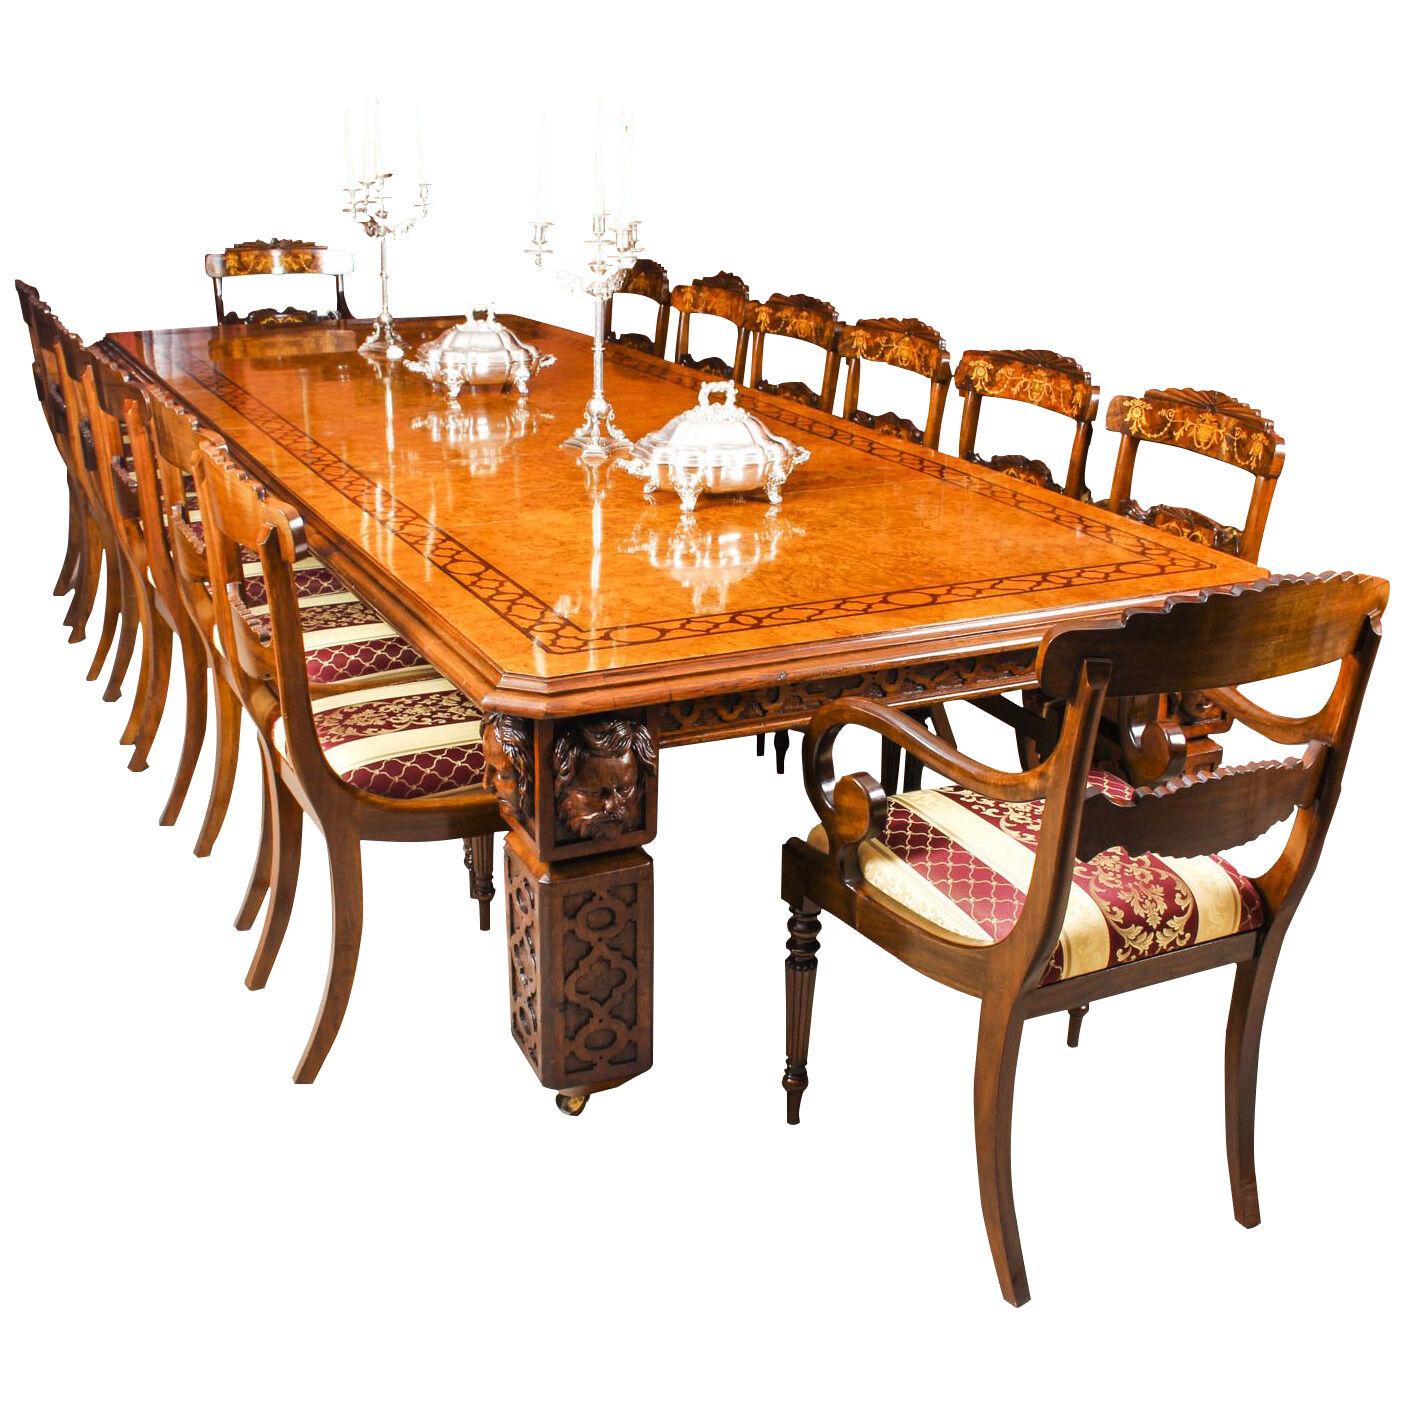 Antique 12ft Elizabethan Revival Pollard Oak Dining Table 19th C and 14 chairs